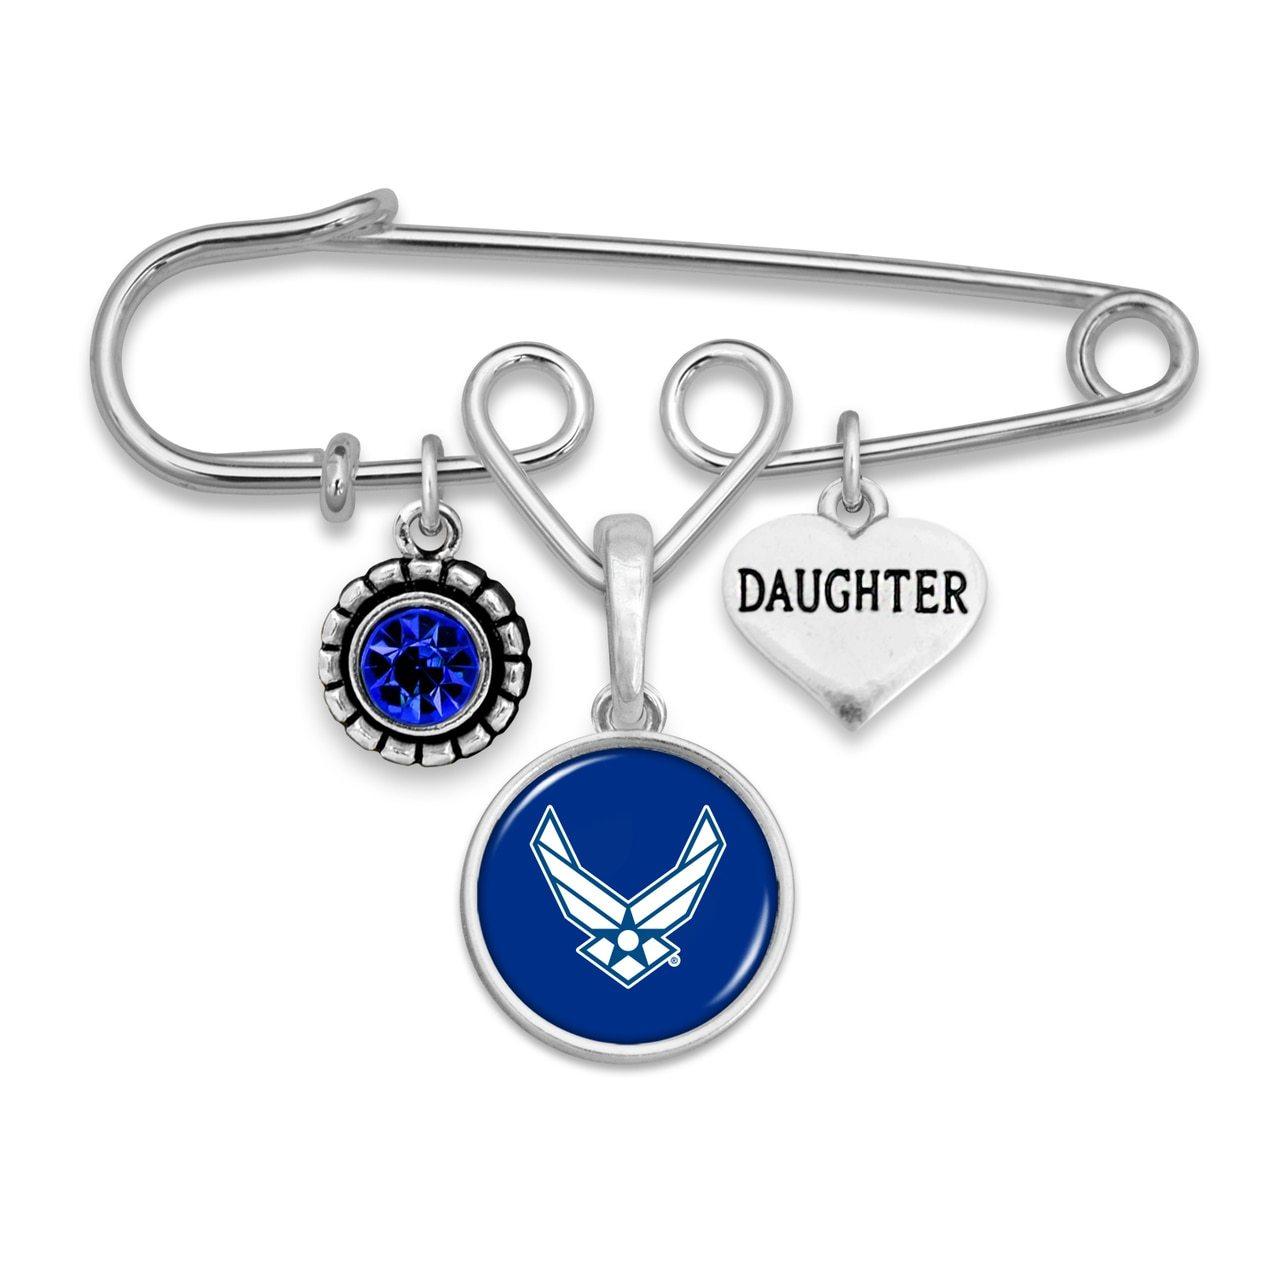 U.S. Air Force Daughter Accent Charm Brooch - Military Republic